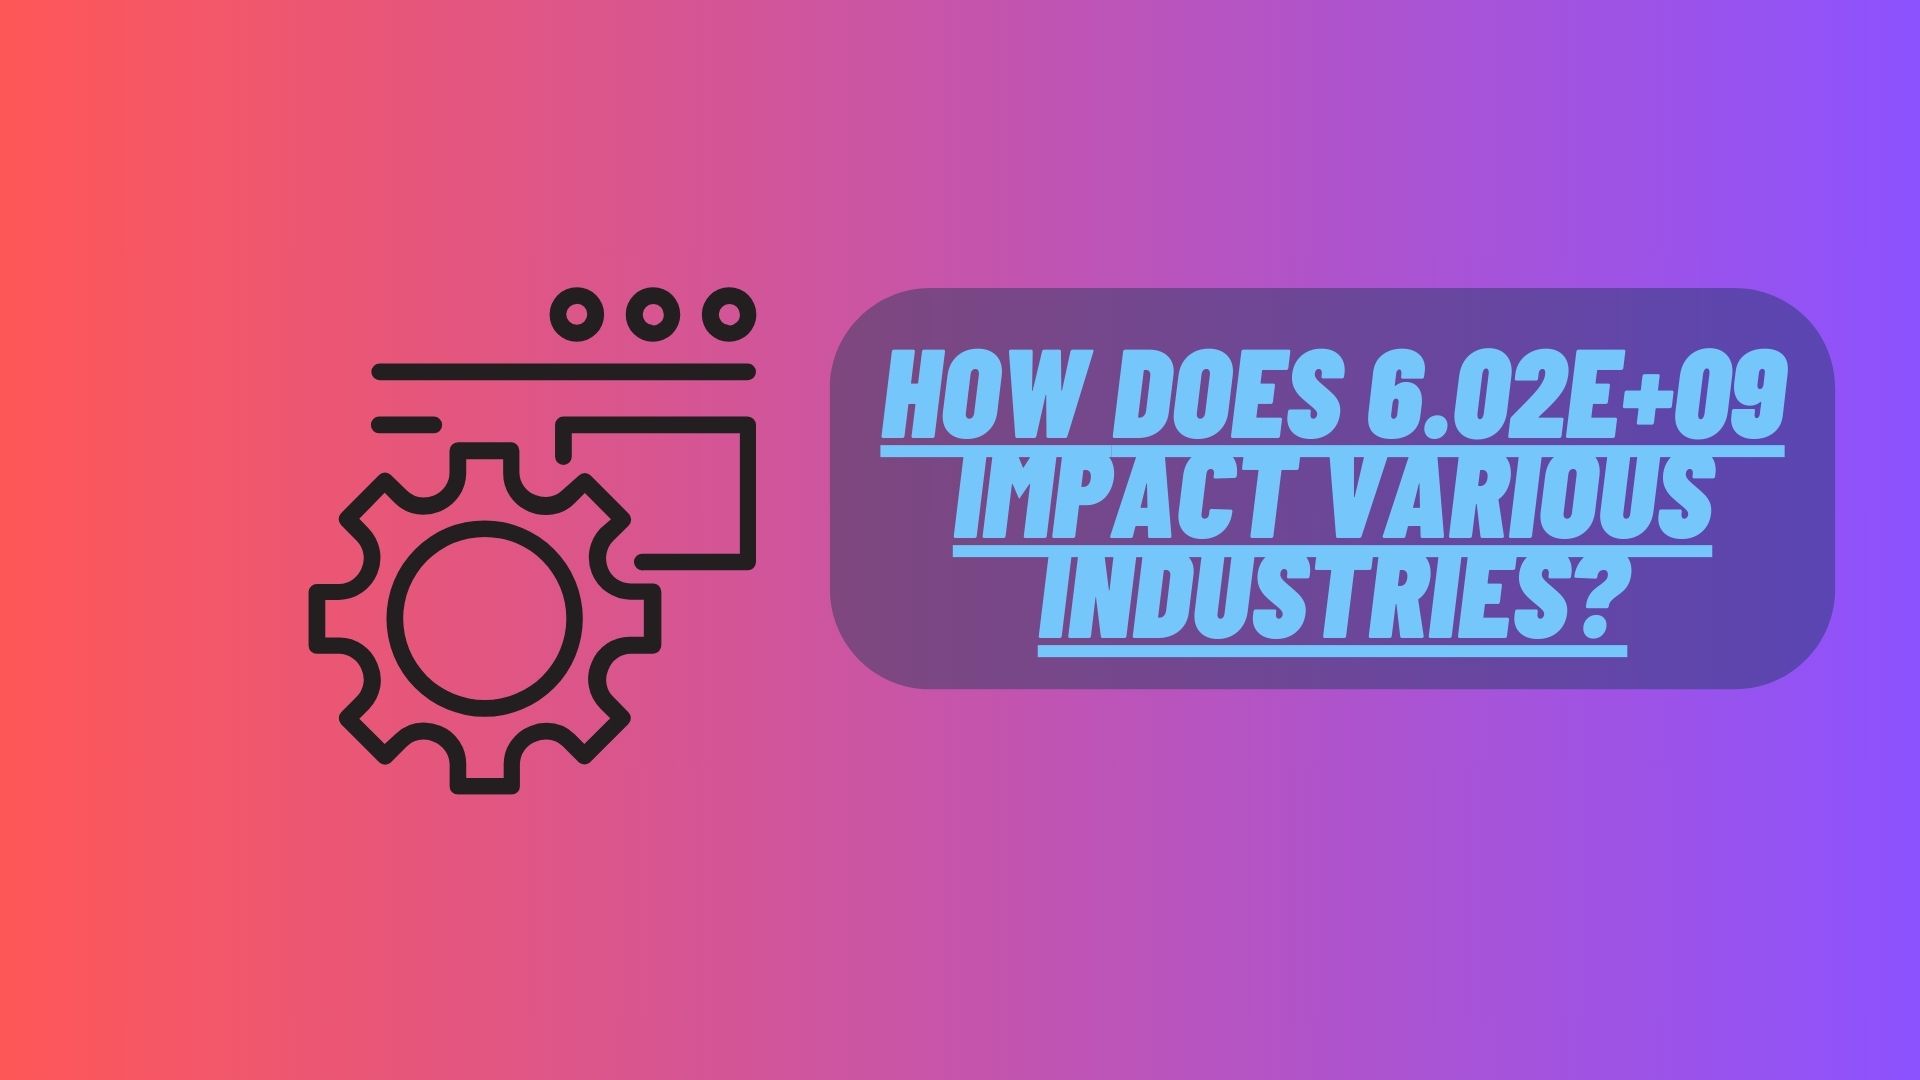 How Does 6.02E+09 Impact Various Industries?